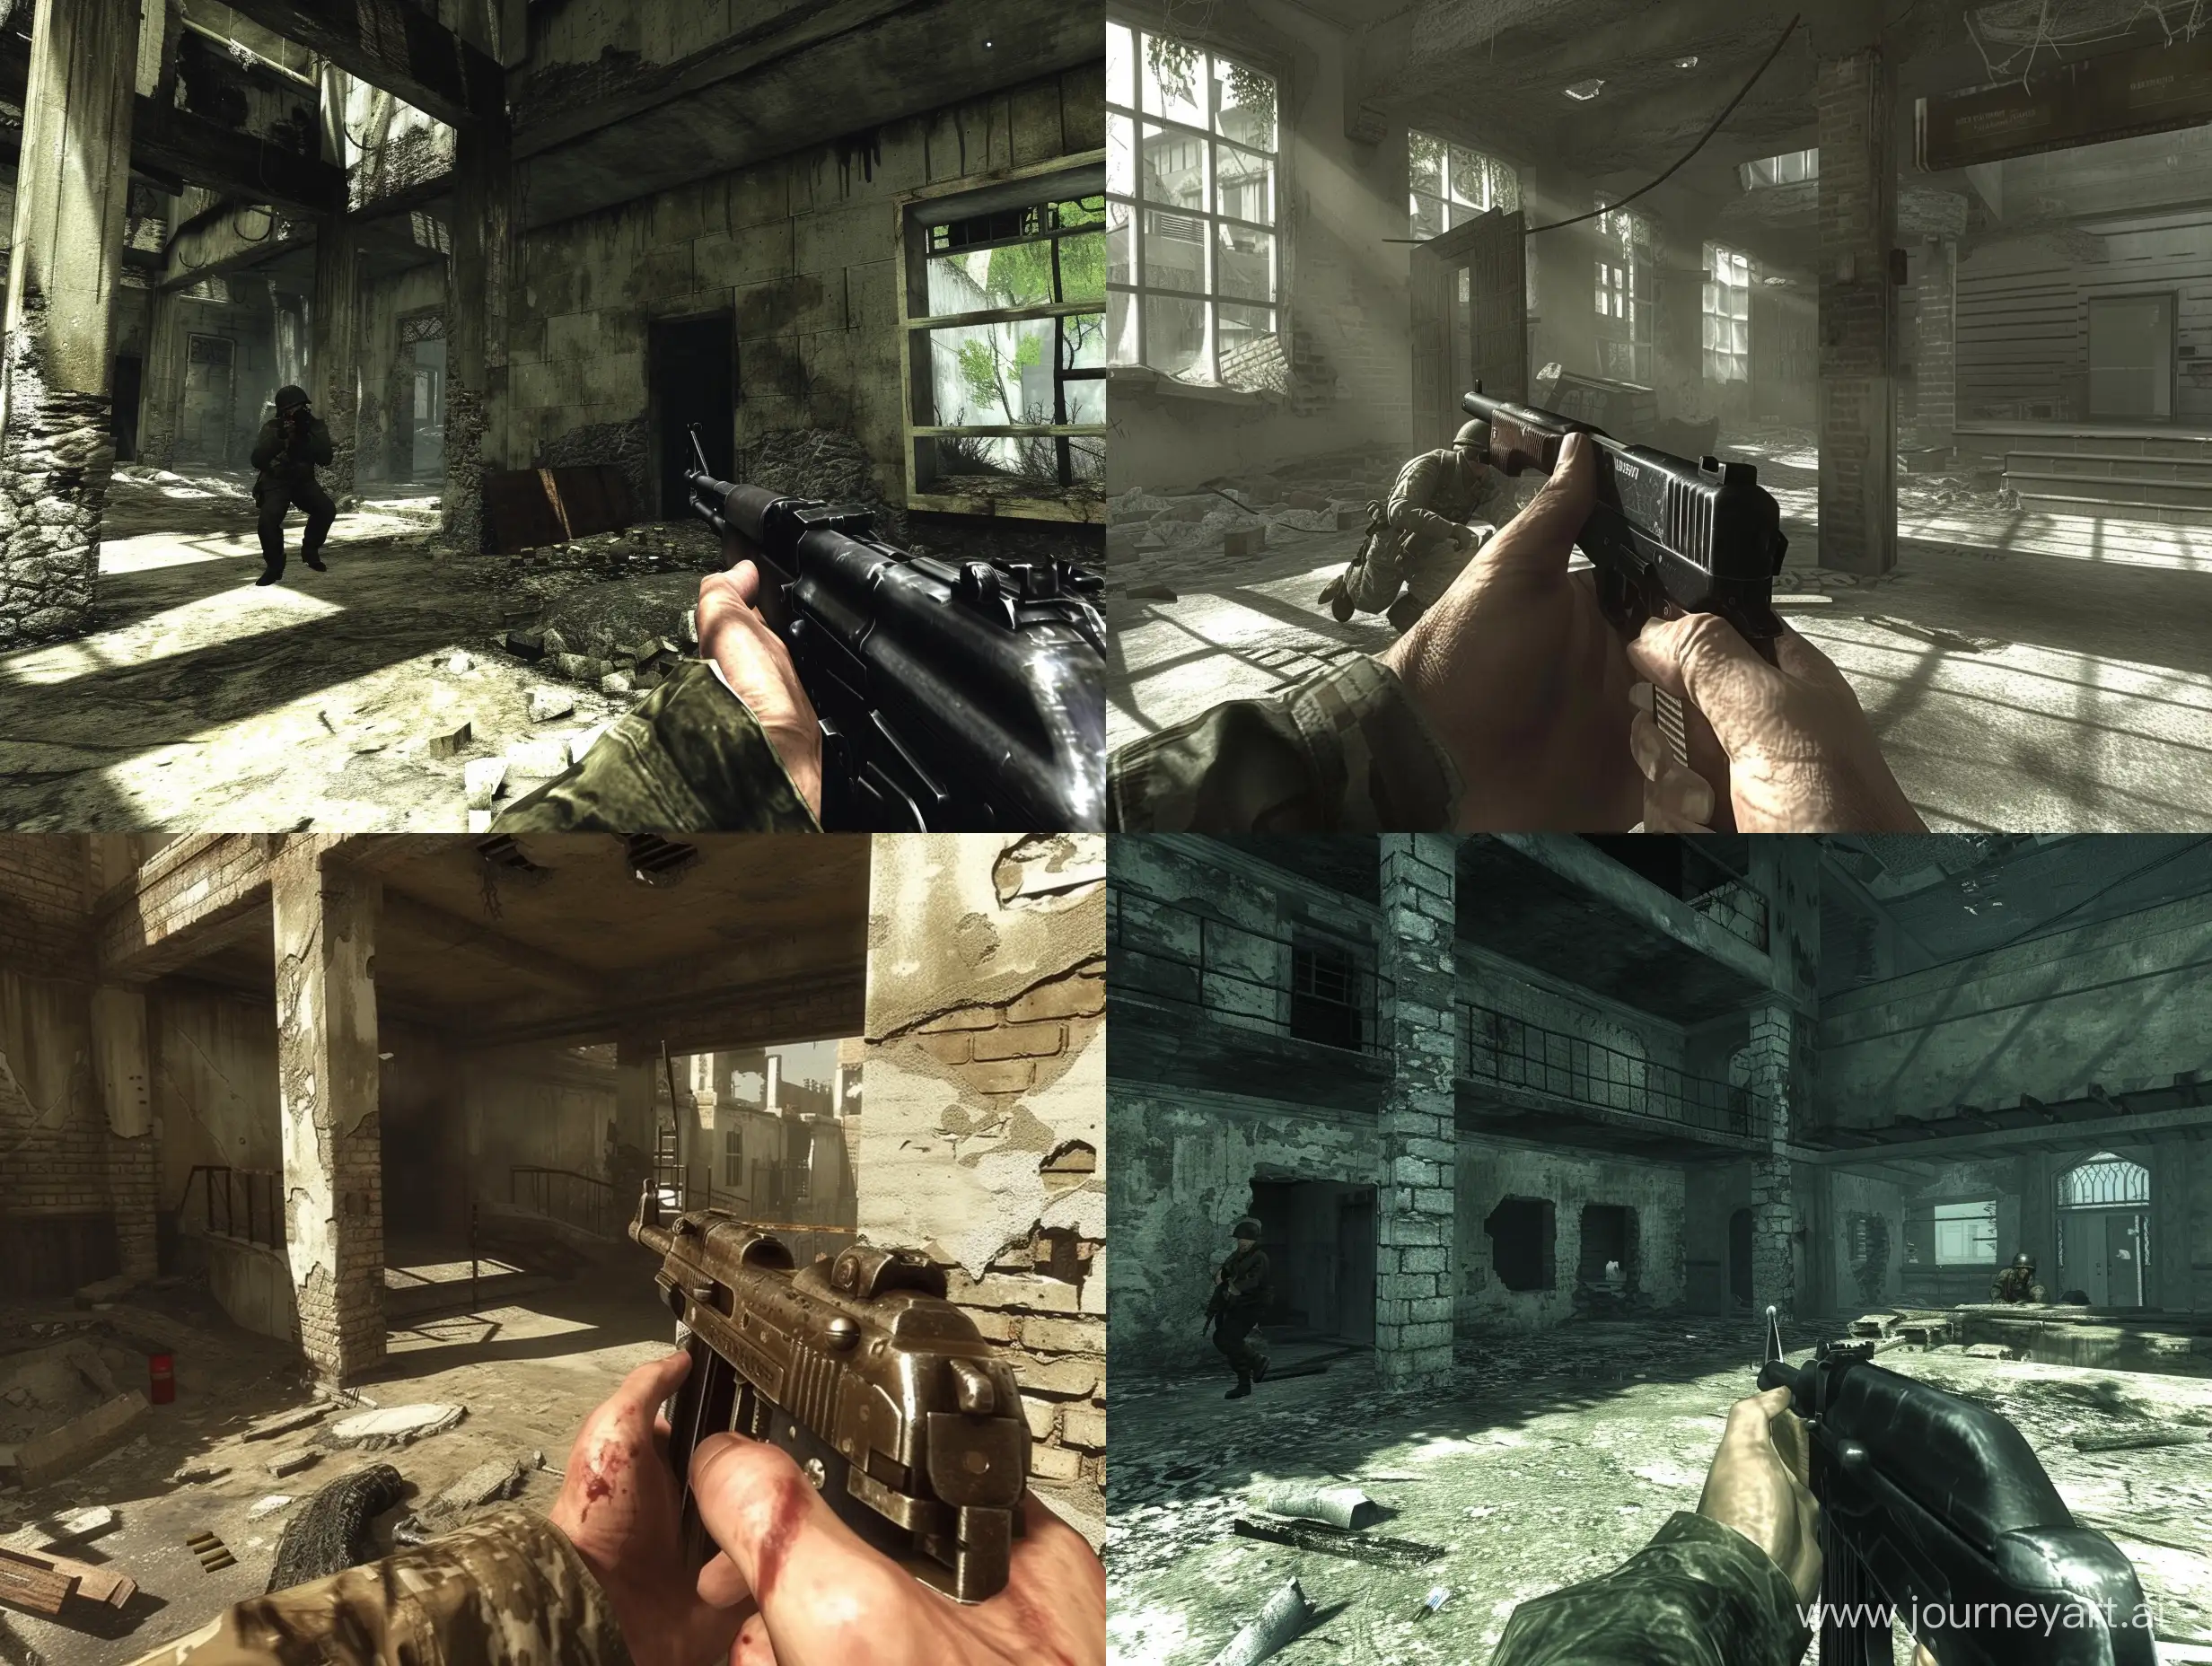 Intense-First-Person-Action-Soldier-with-PPSh-in-Abandoned-Building-Call-of-Duty-World-at-War-2008